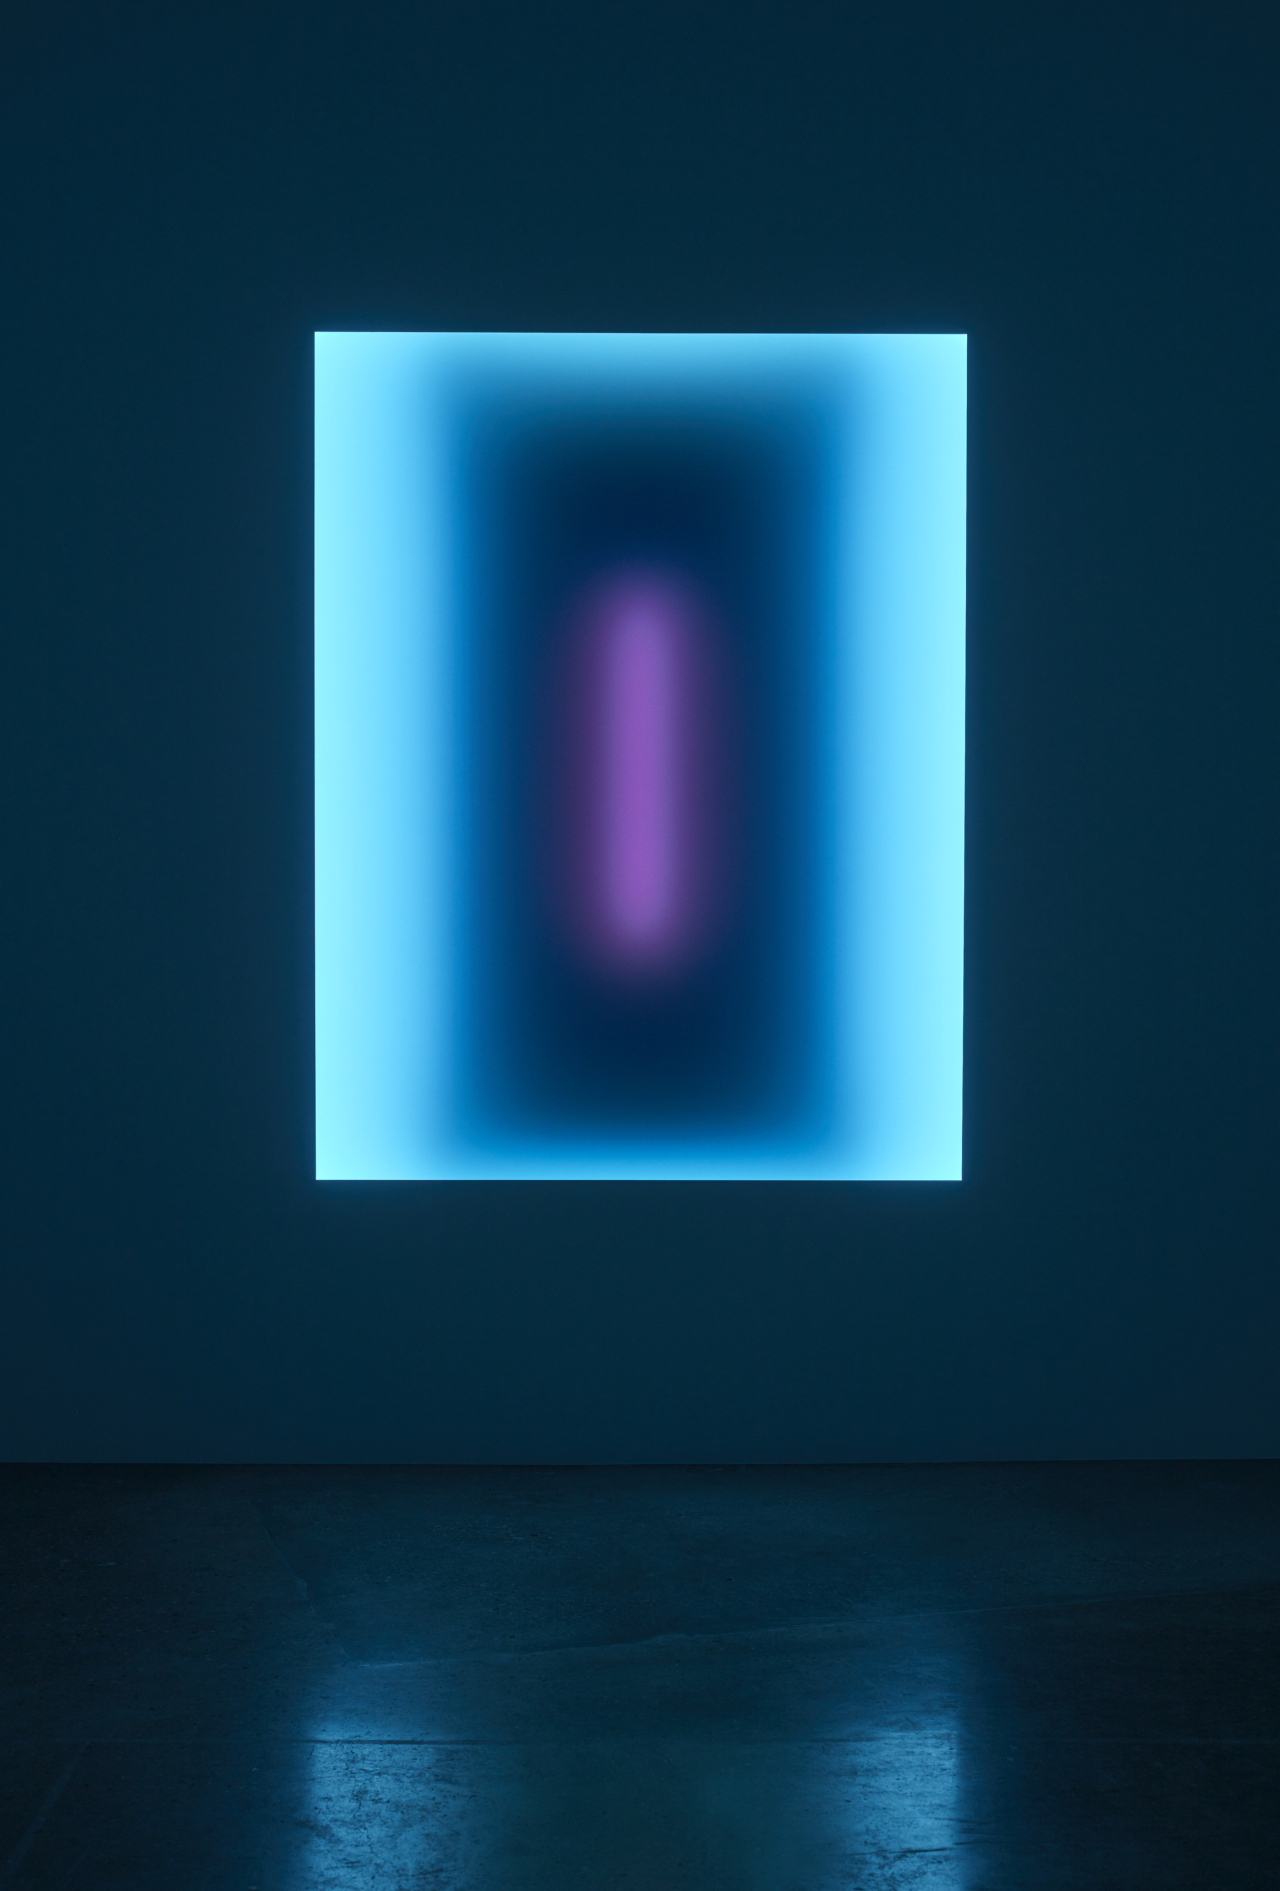 James Turrel’s 2019 “Atlantis, Medium Rectangle Glass” will be displayed at Pace Gallery’s booth. (KIAF)